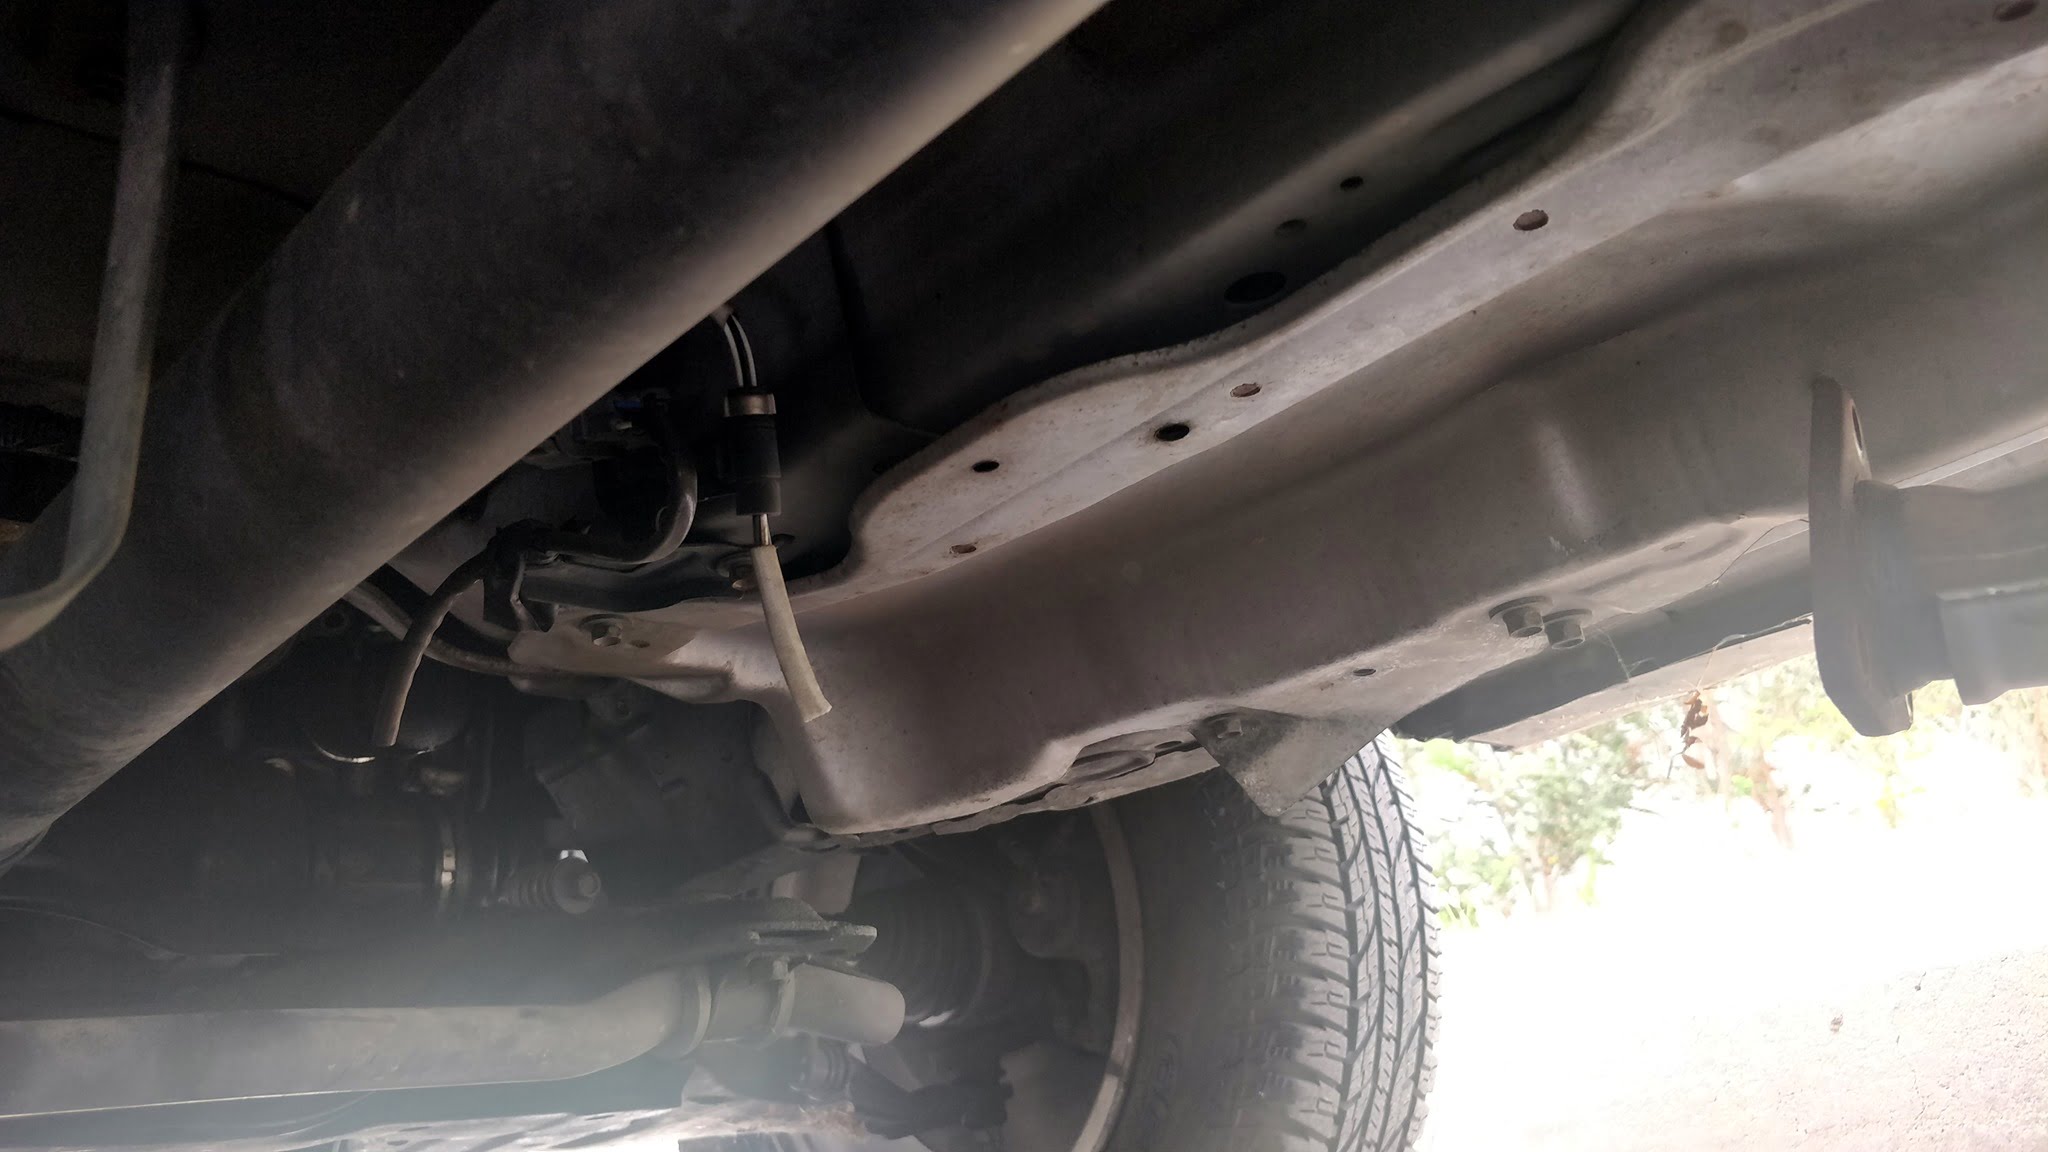 Someone stole the catalytic converter off the CRV. They...